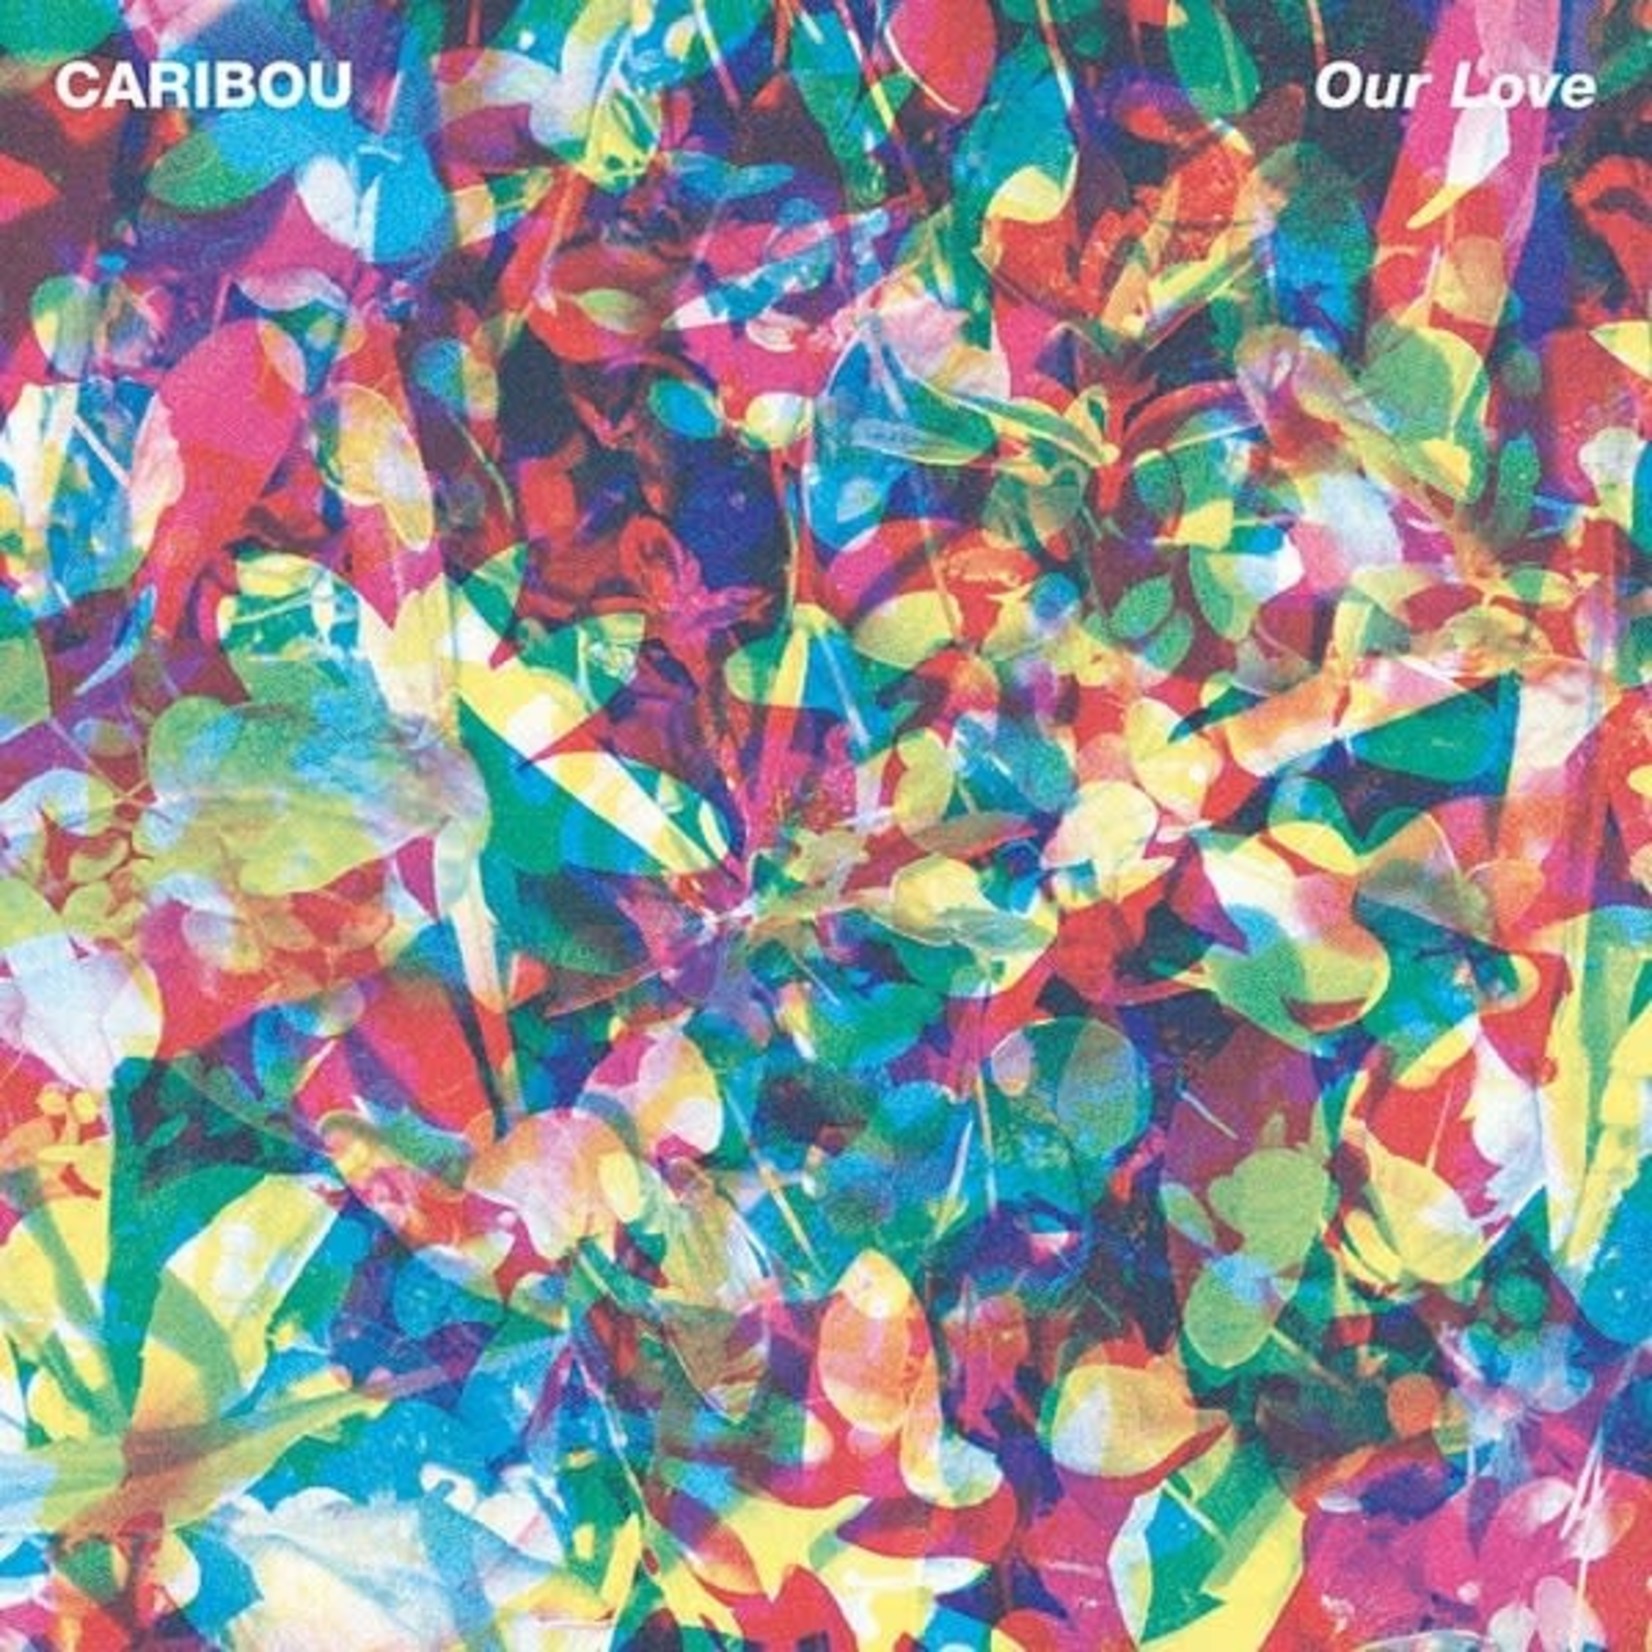 [New] Caribou - Our Love